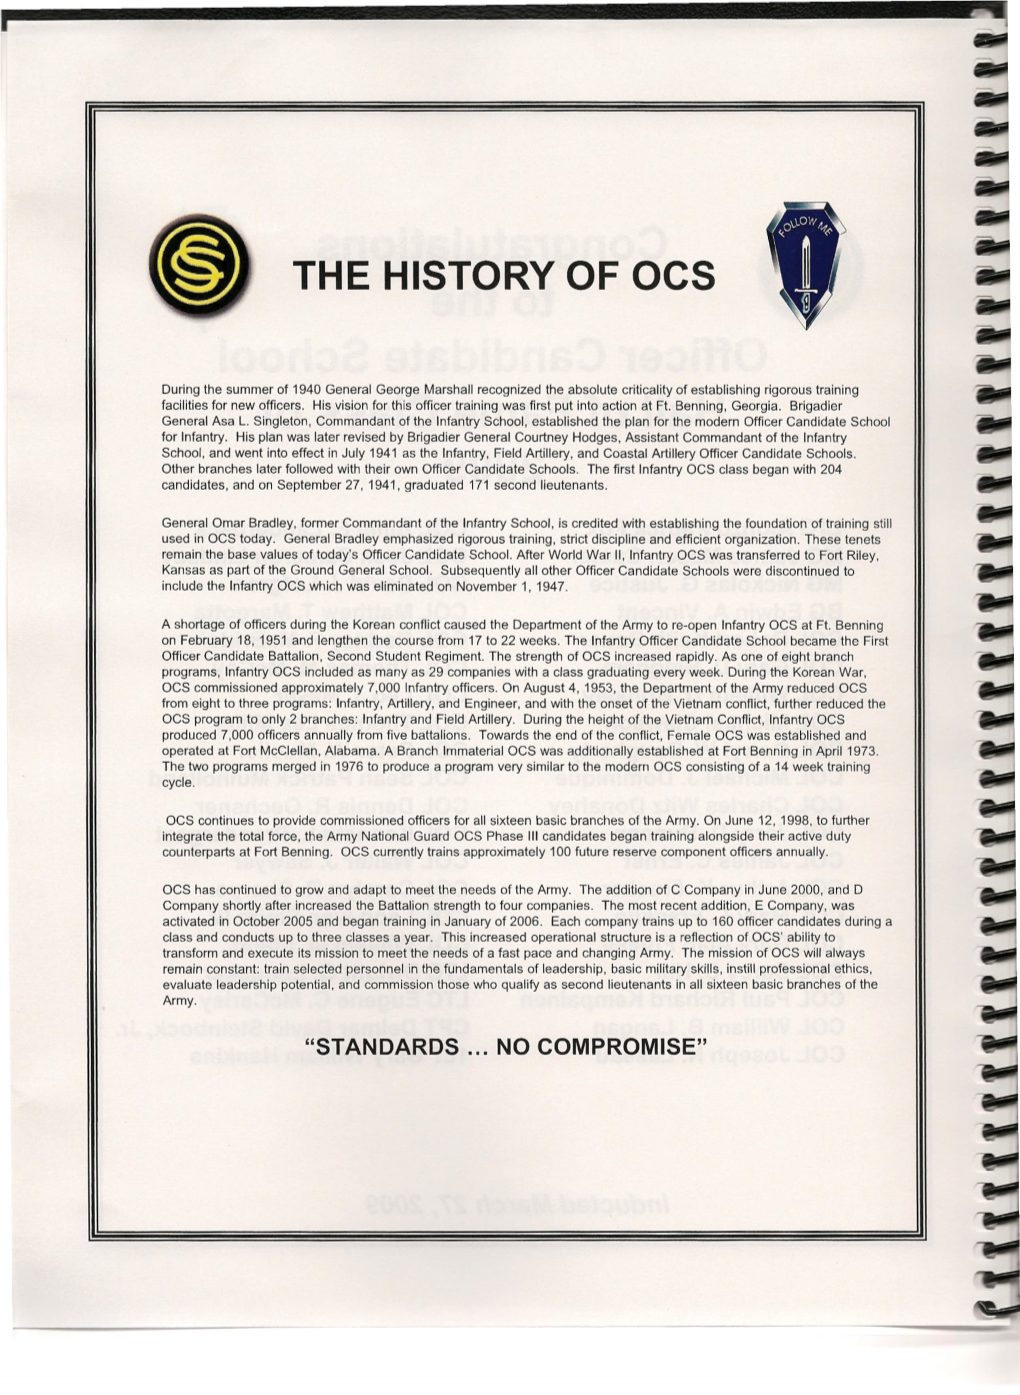 THE HISTORY of Oes